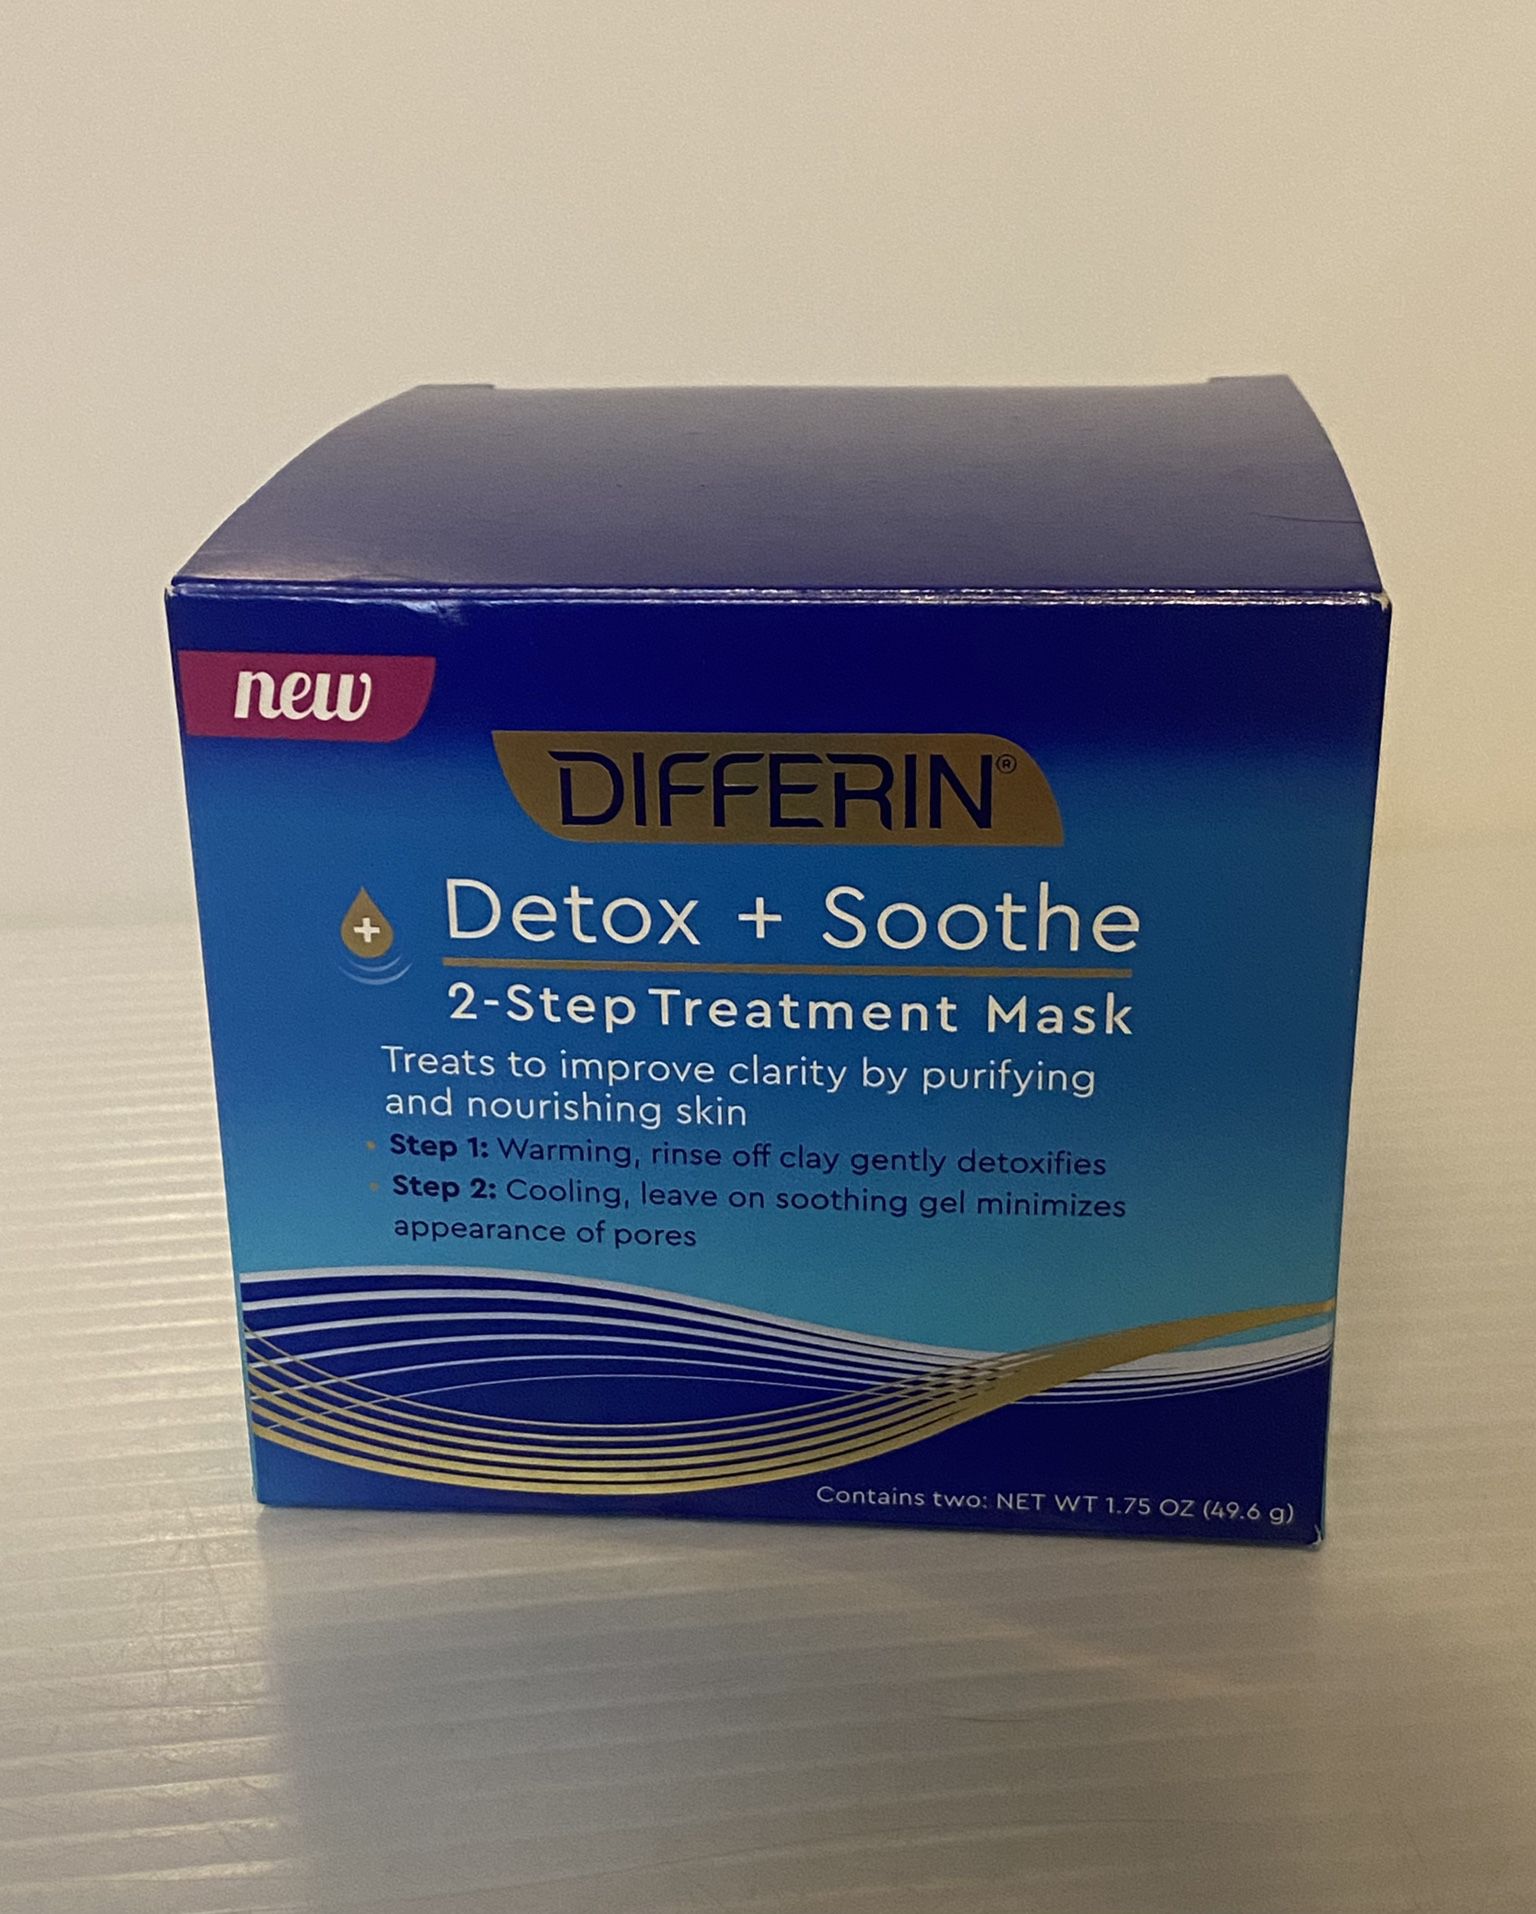 NEW DIFFERIN Detox + Soothe 2-Step Treatment Mask      17.97$ Retail 